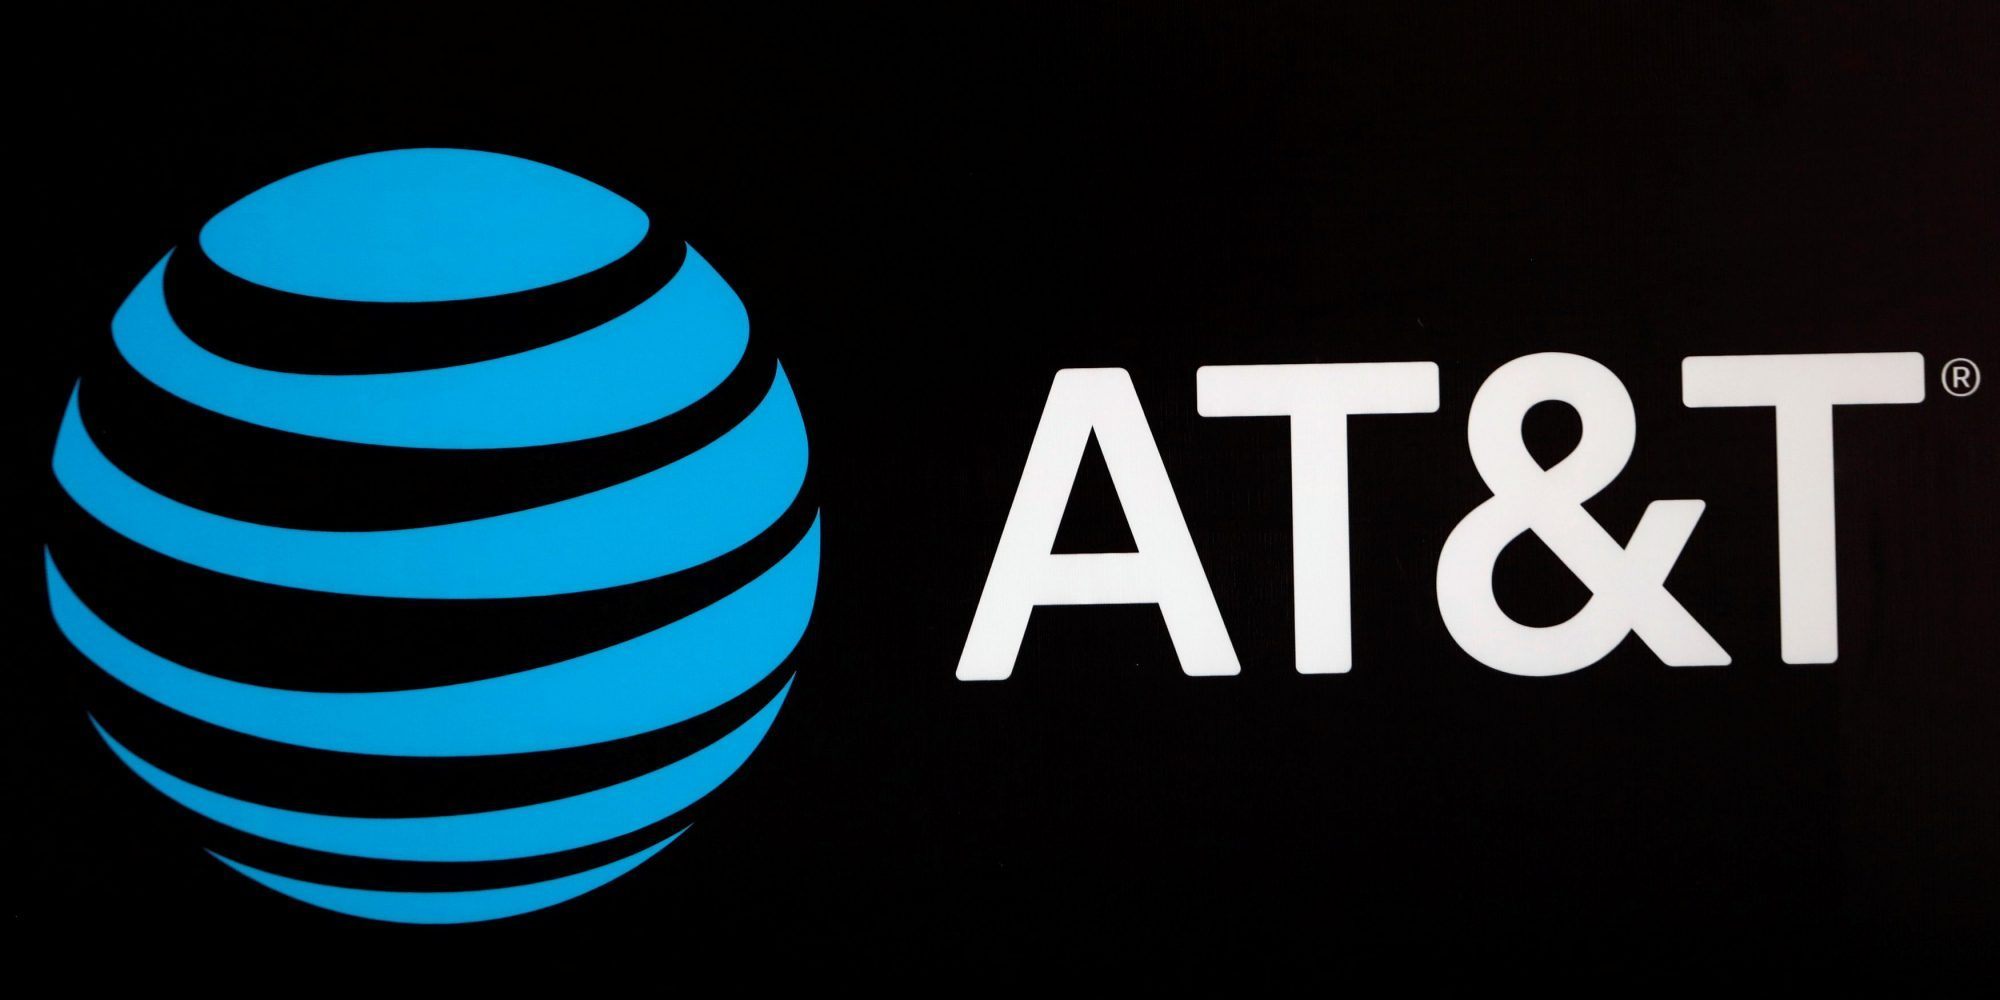 AT&T Says 75% of Network Back Up, But Outages Remain